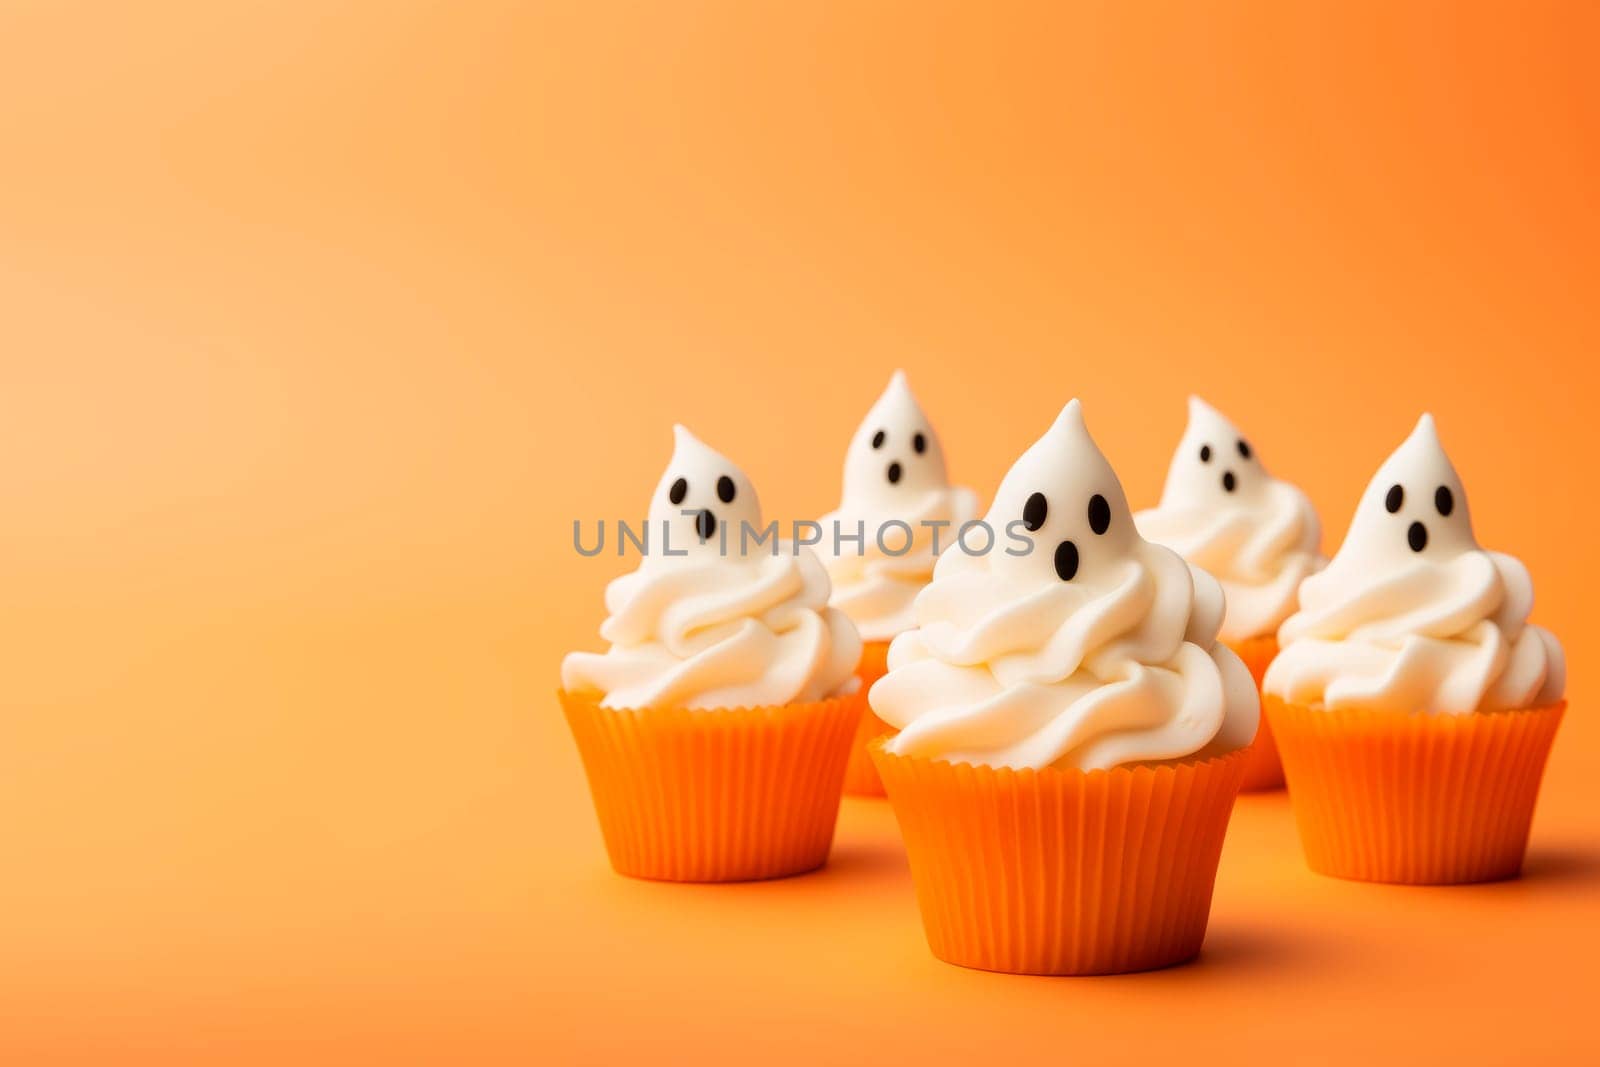 Cute haunted cupcakes for Halloween. by Spirina